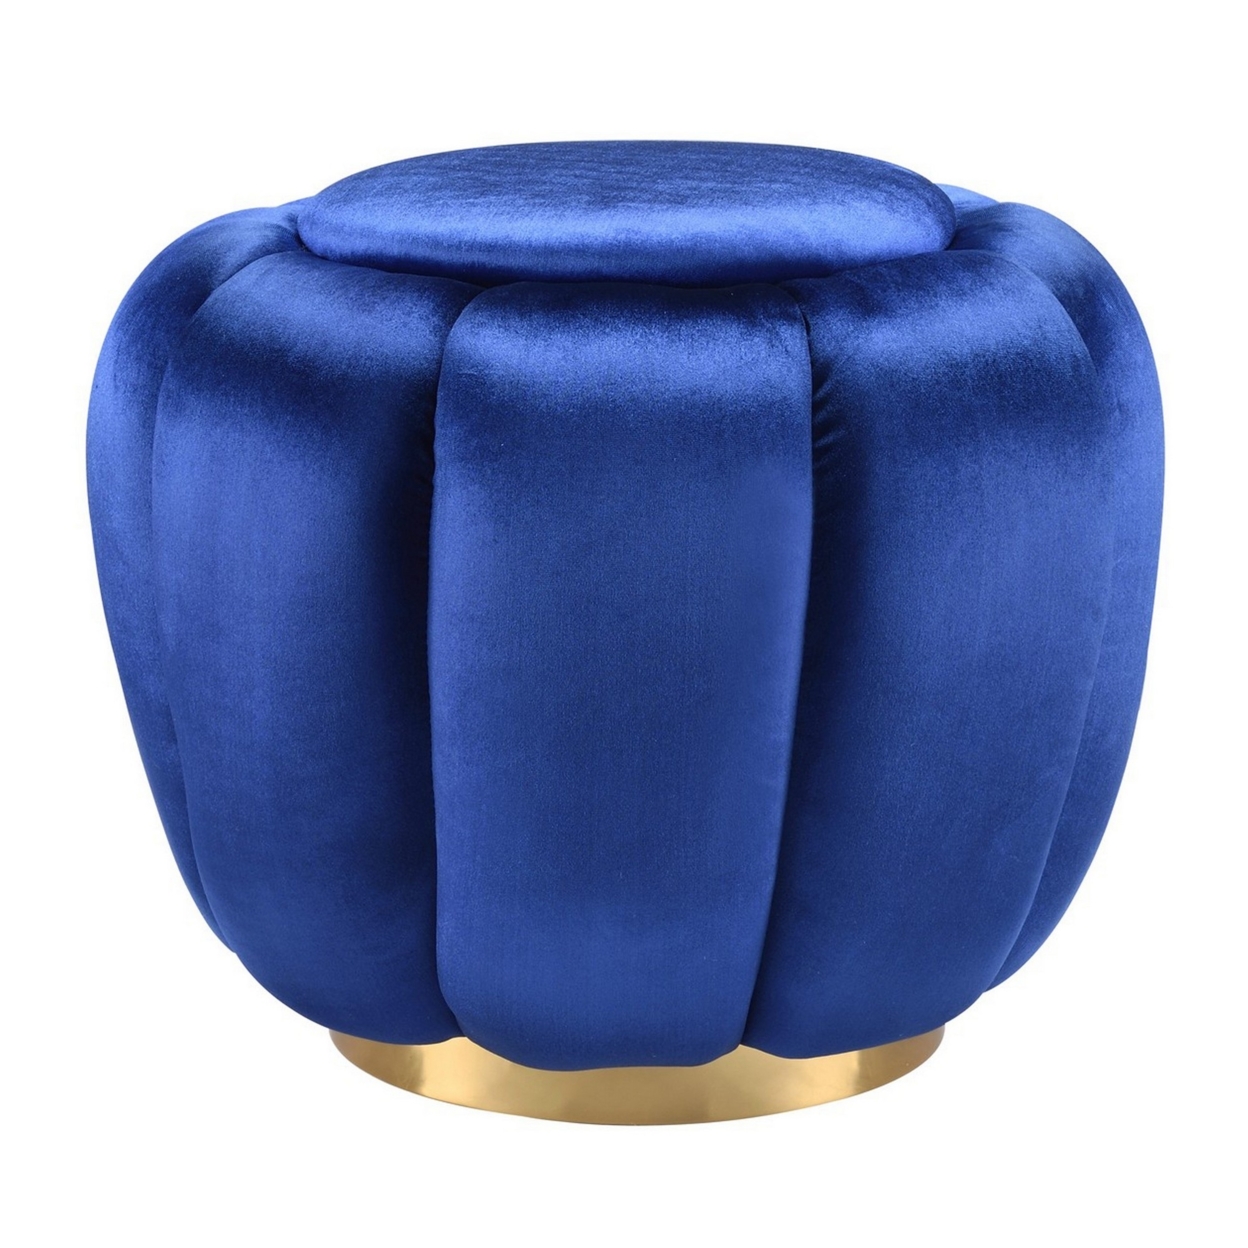 Fabric Channel Tufted Round Ottoman With Metal Base, Blue And Gold- Saltoro Sherpi